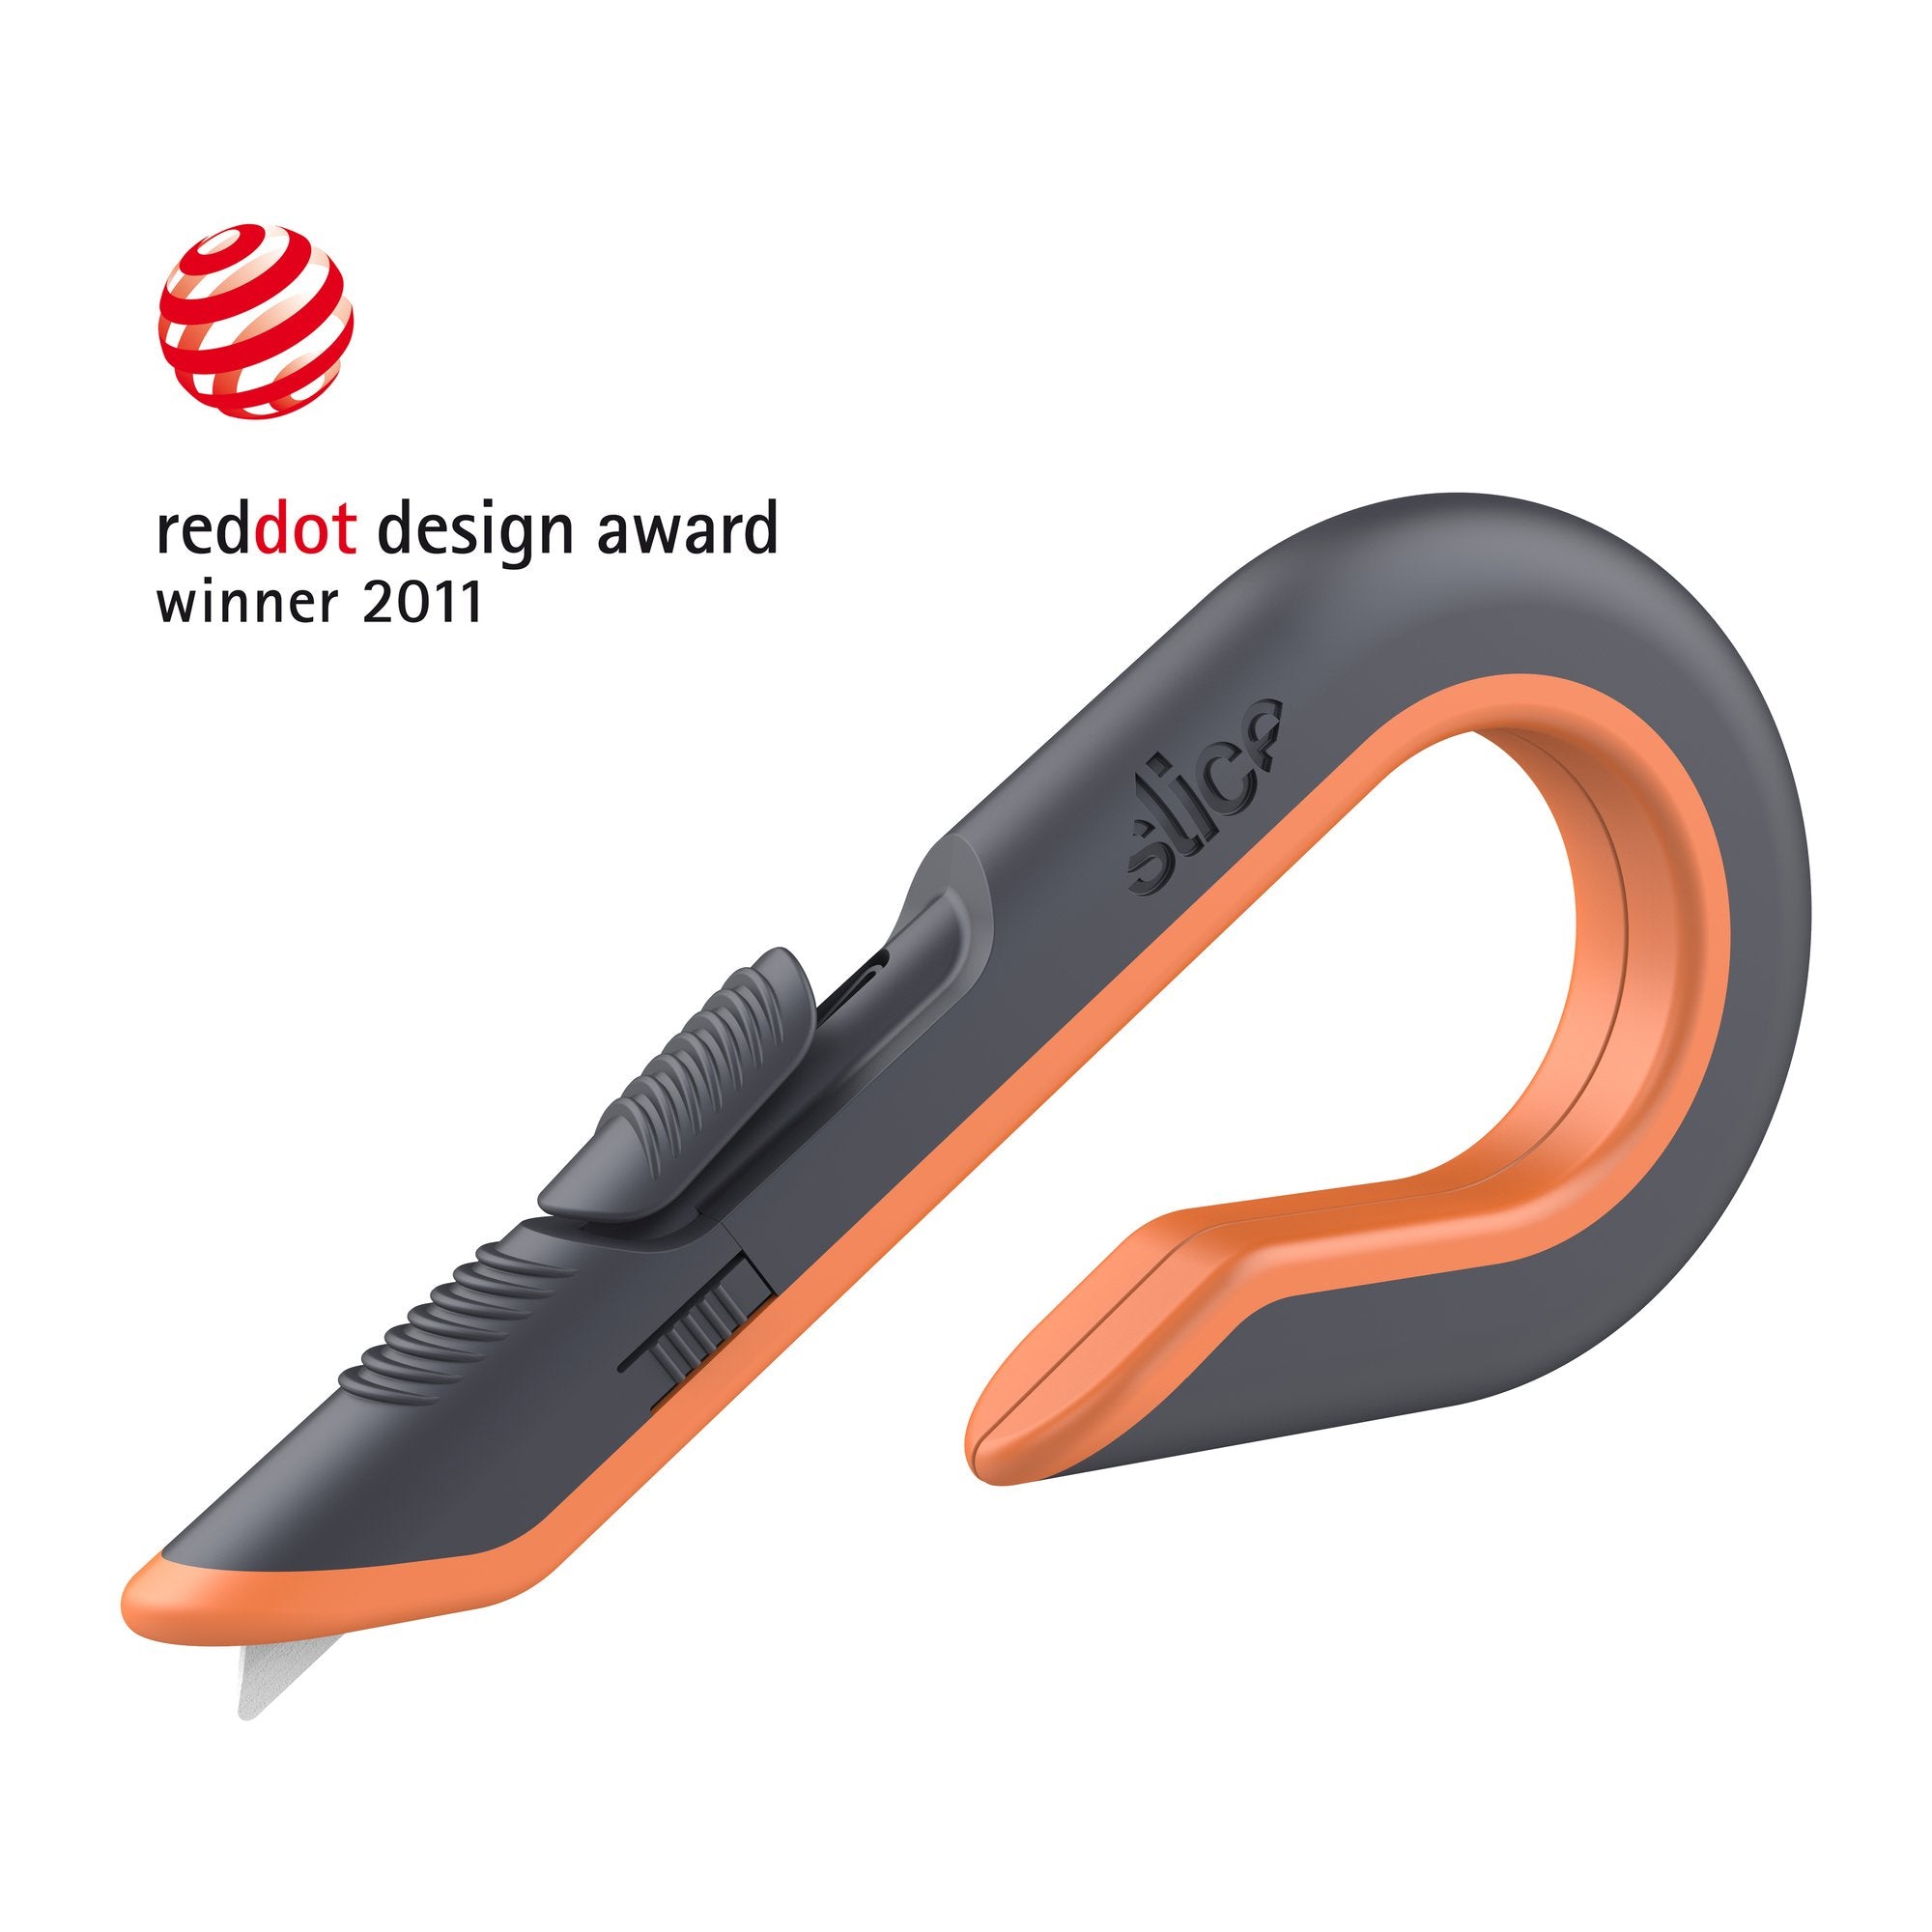 Box Cutters, Double Sided, Replaceable, Carbon Steel, Gray, Orange